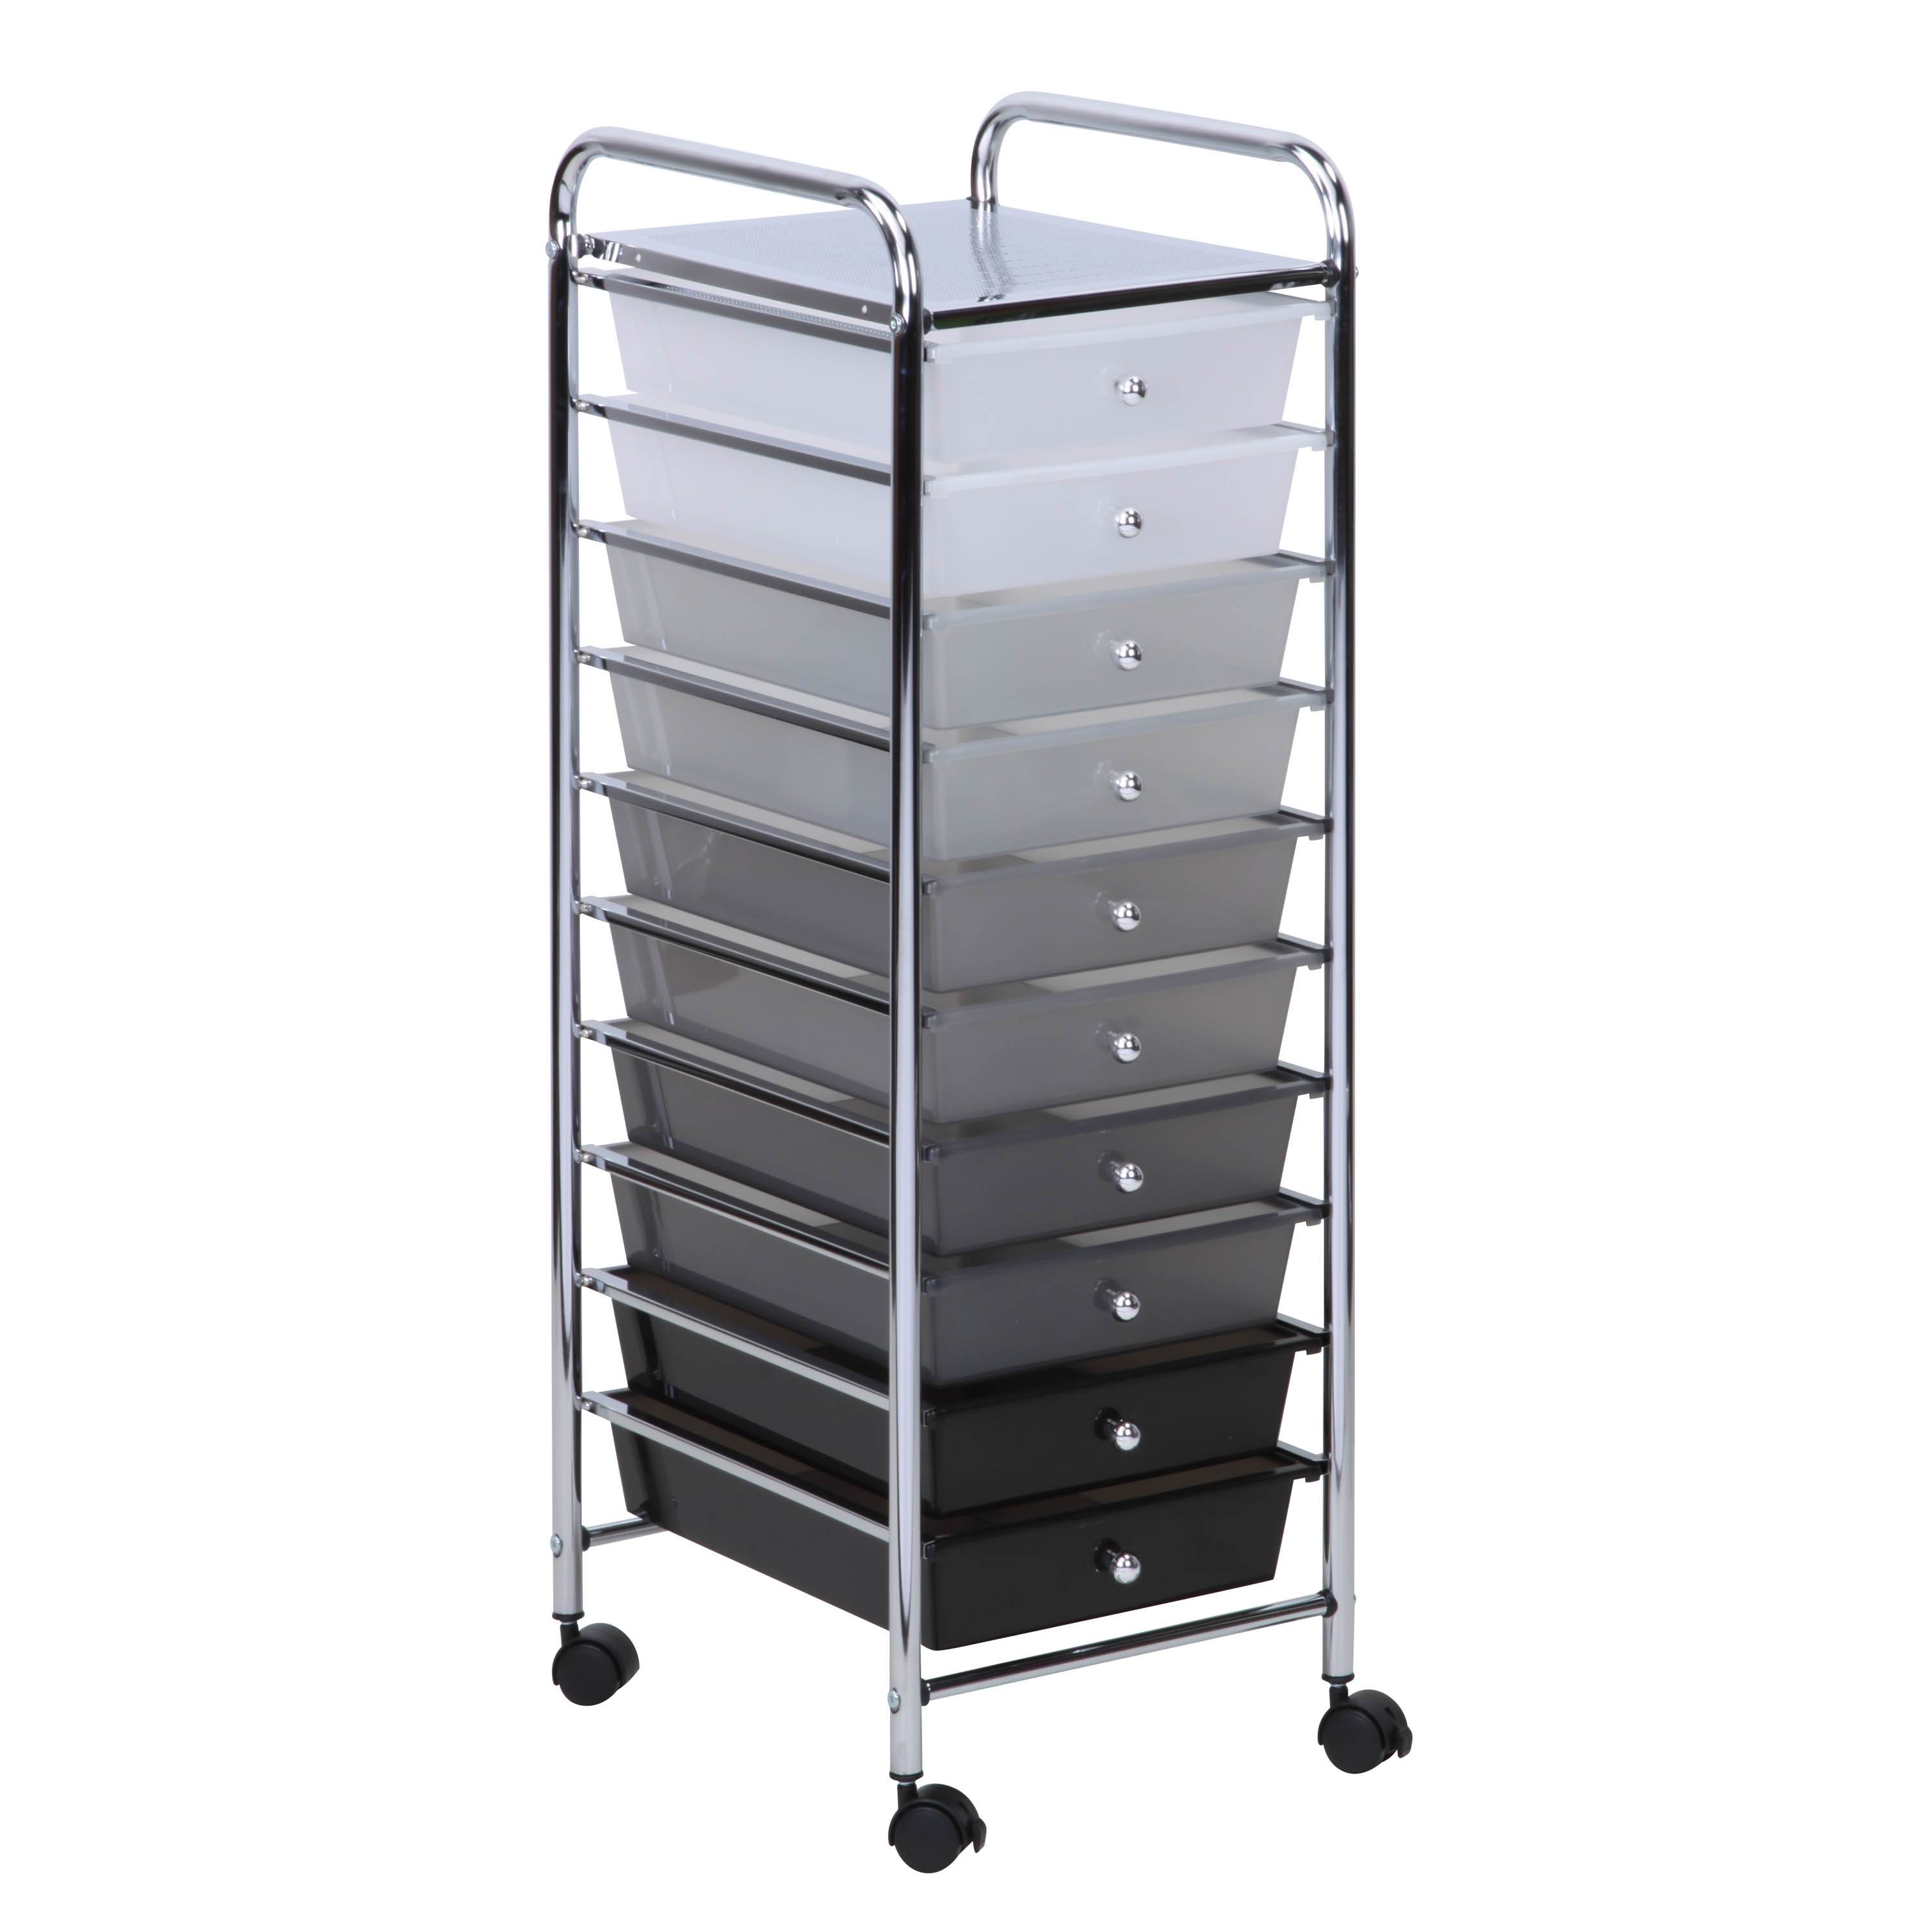 Honey-Can-Do Plastic and Steel 10-Drawer Rolling Storage Cart with 1 Shelf, Gray Ombré - image 1 of 4